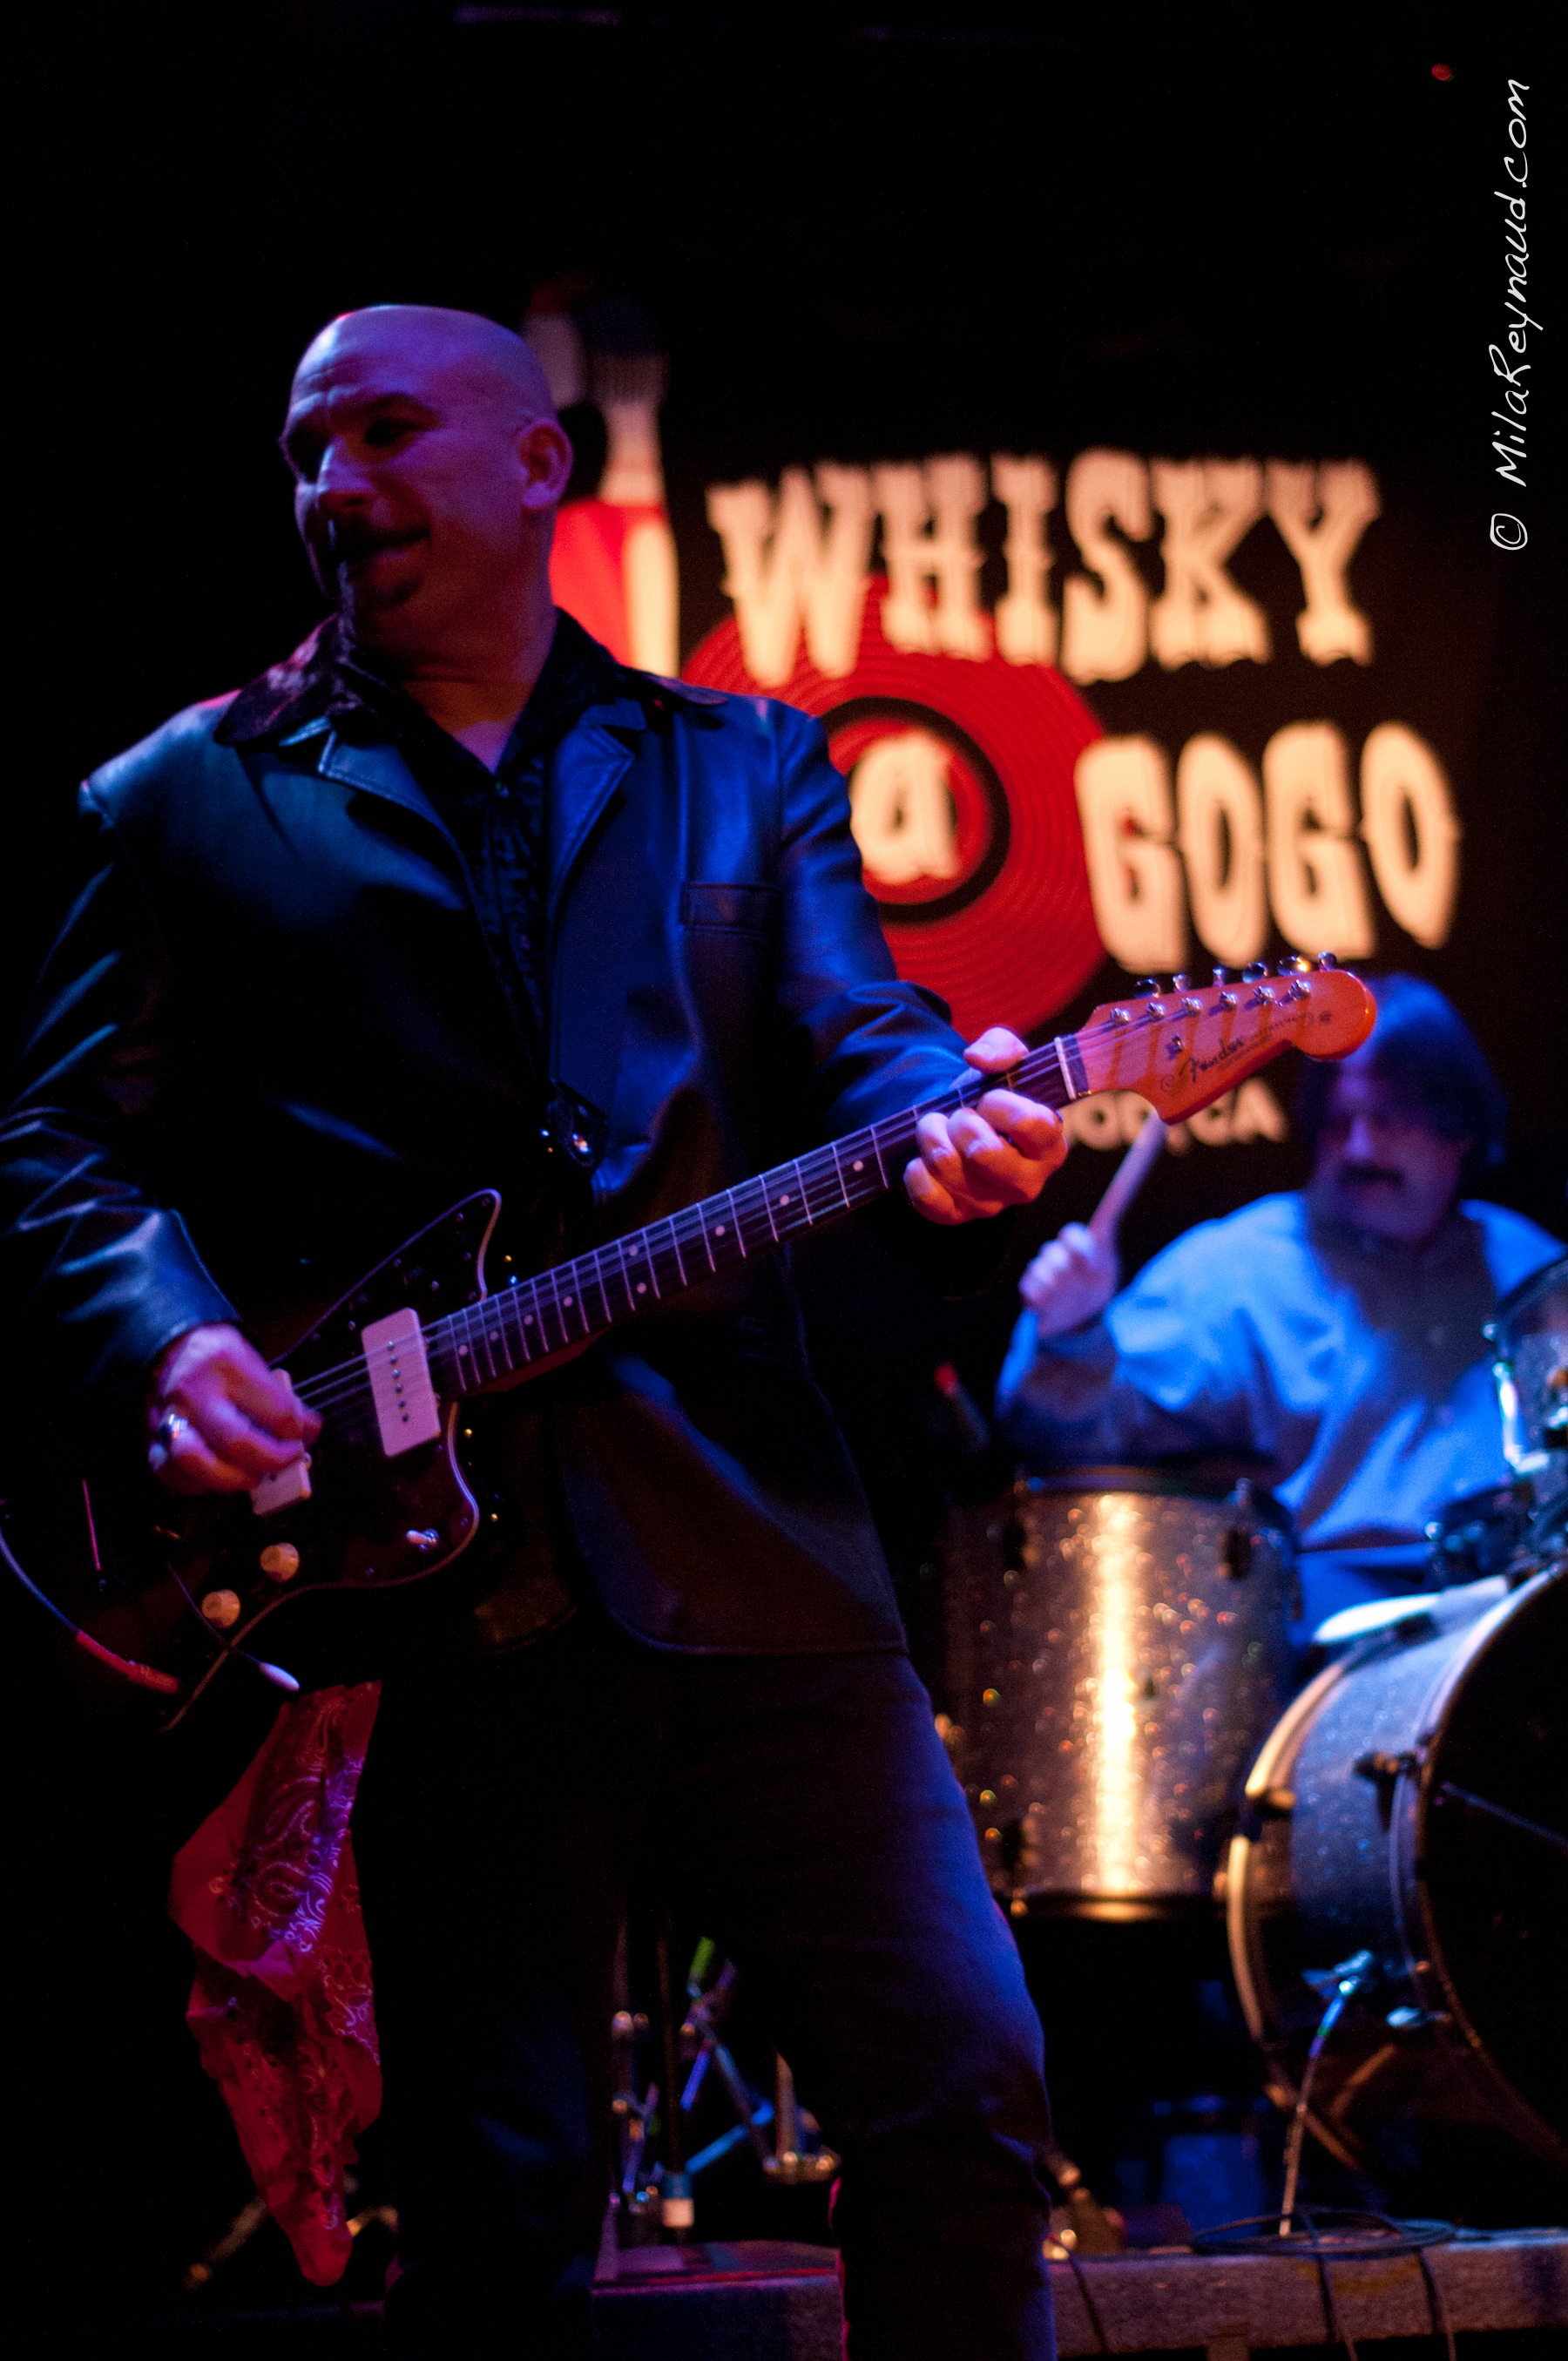 Sammy Busby and Dixie's Deceivers perform at The Whisky a Go Go, Hollywood, California.